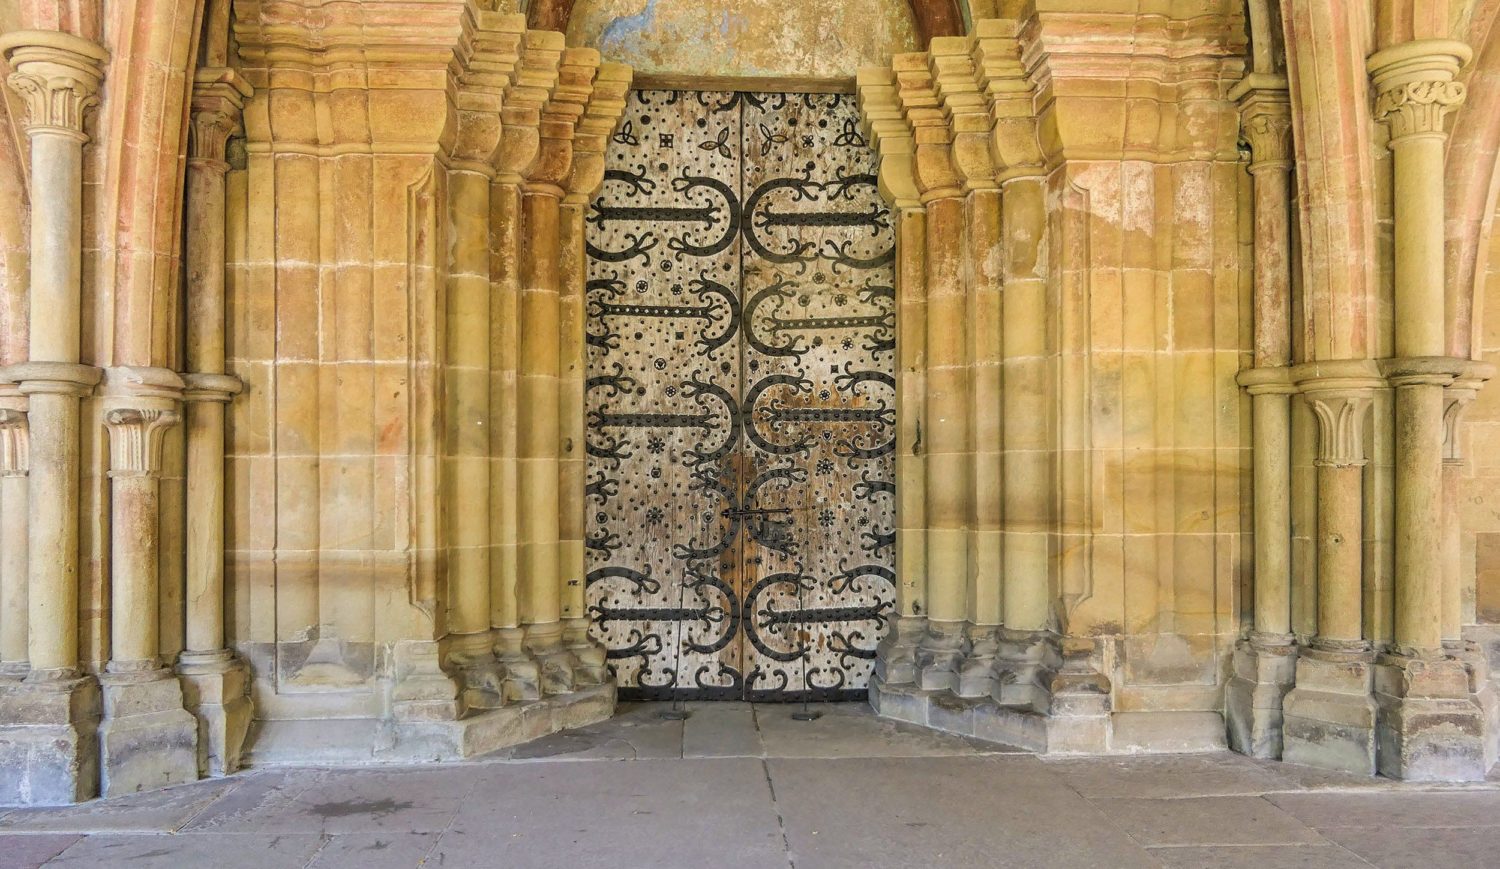 This door led from paradise to the house of God, the monastery church © cmr - Joachim Negwer